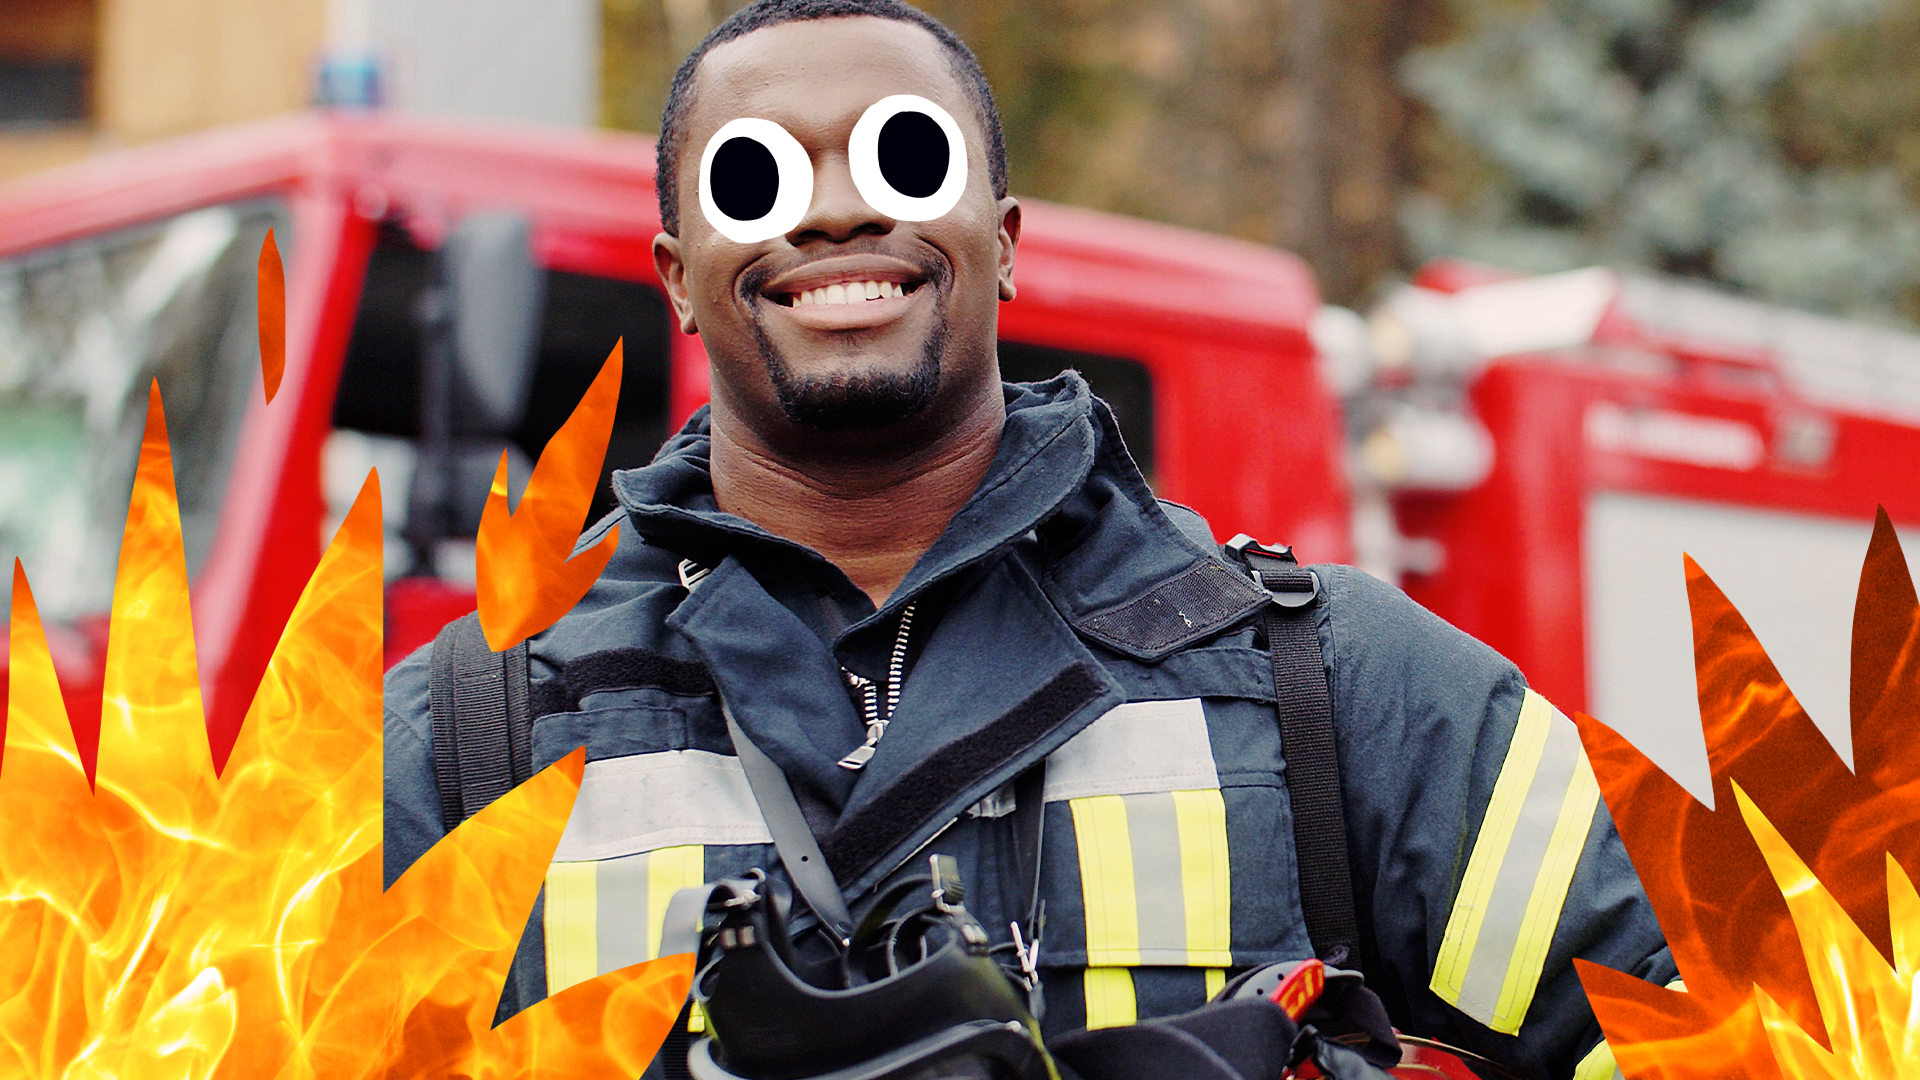 Smiling firefighter with flames